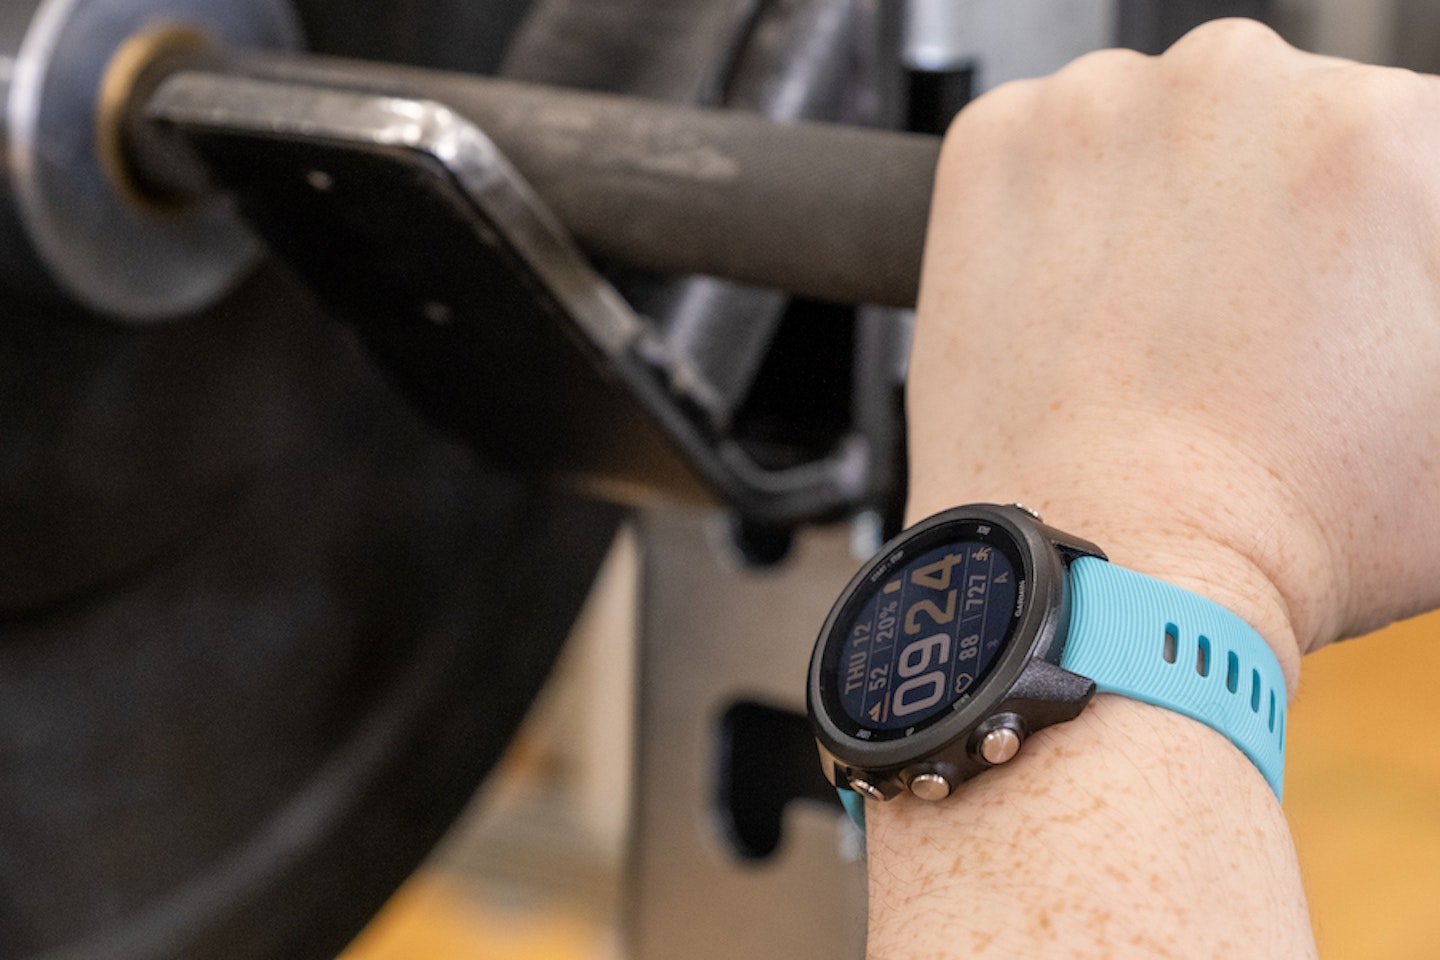 Garmin Forerunner 245 being used with a barbell